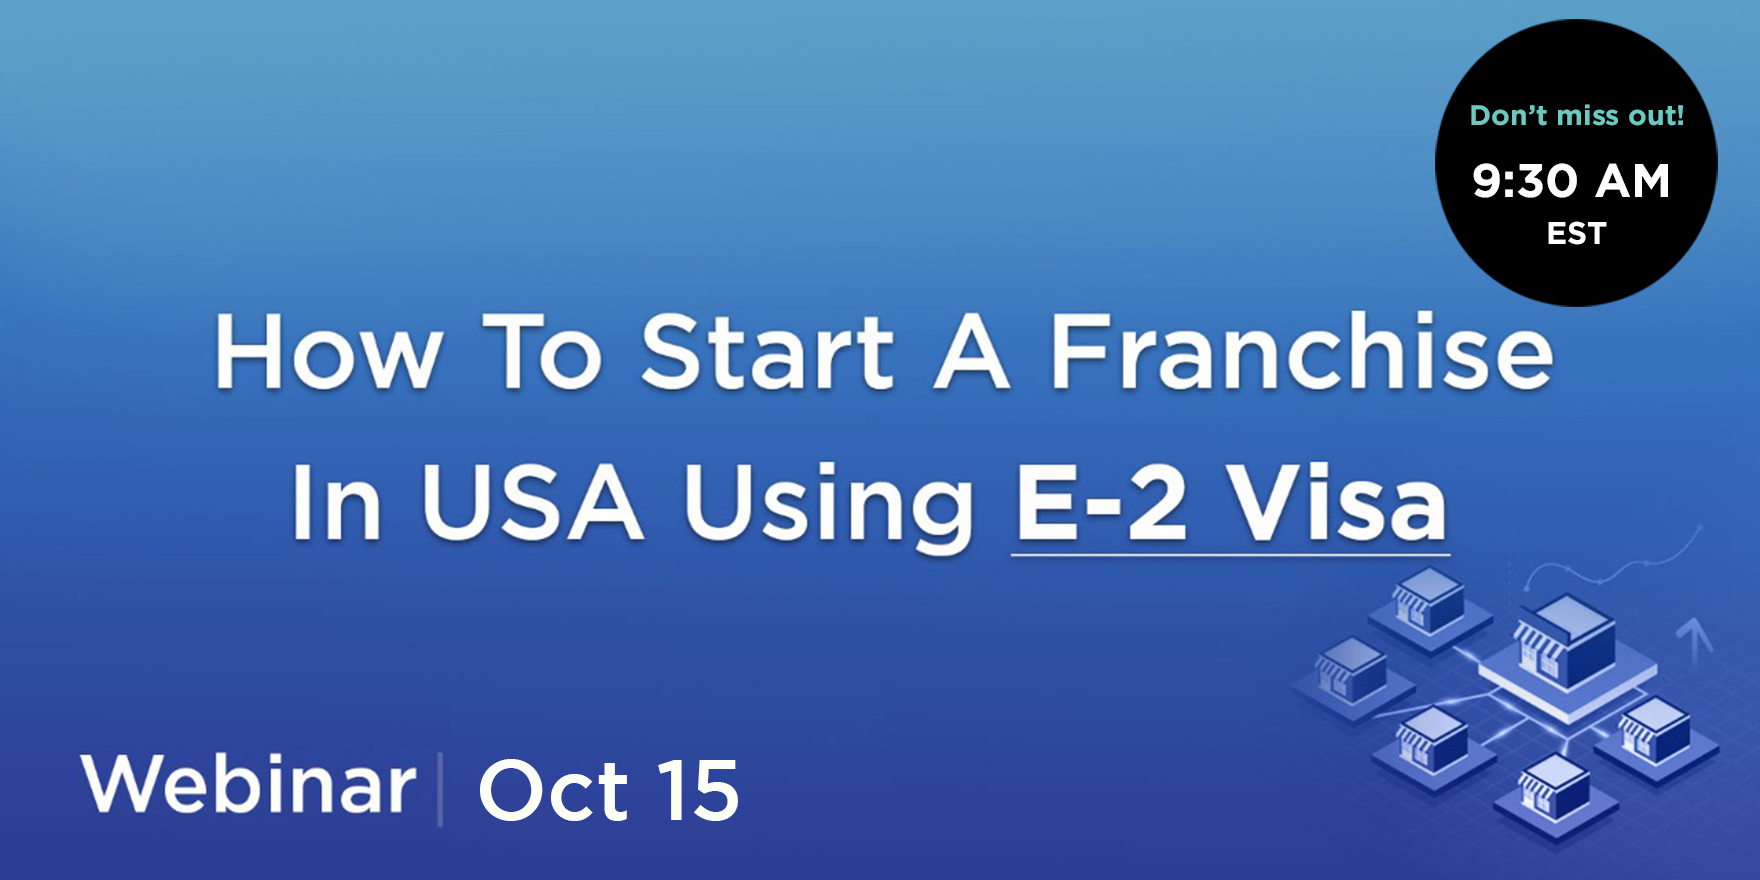 L-1 Visa and E Visa For Non-US Citizens To Start A Business In The US, Paris, France